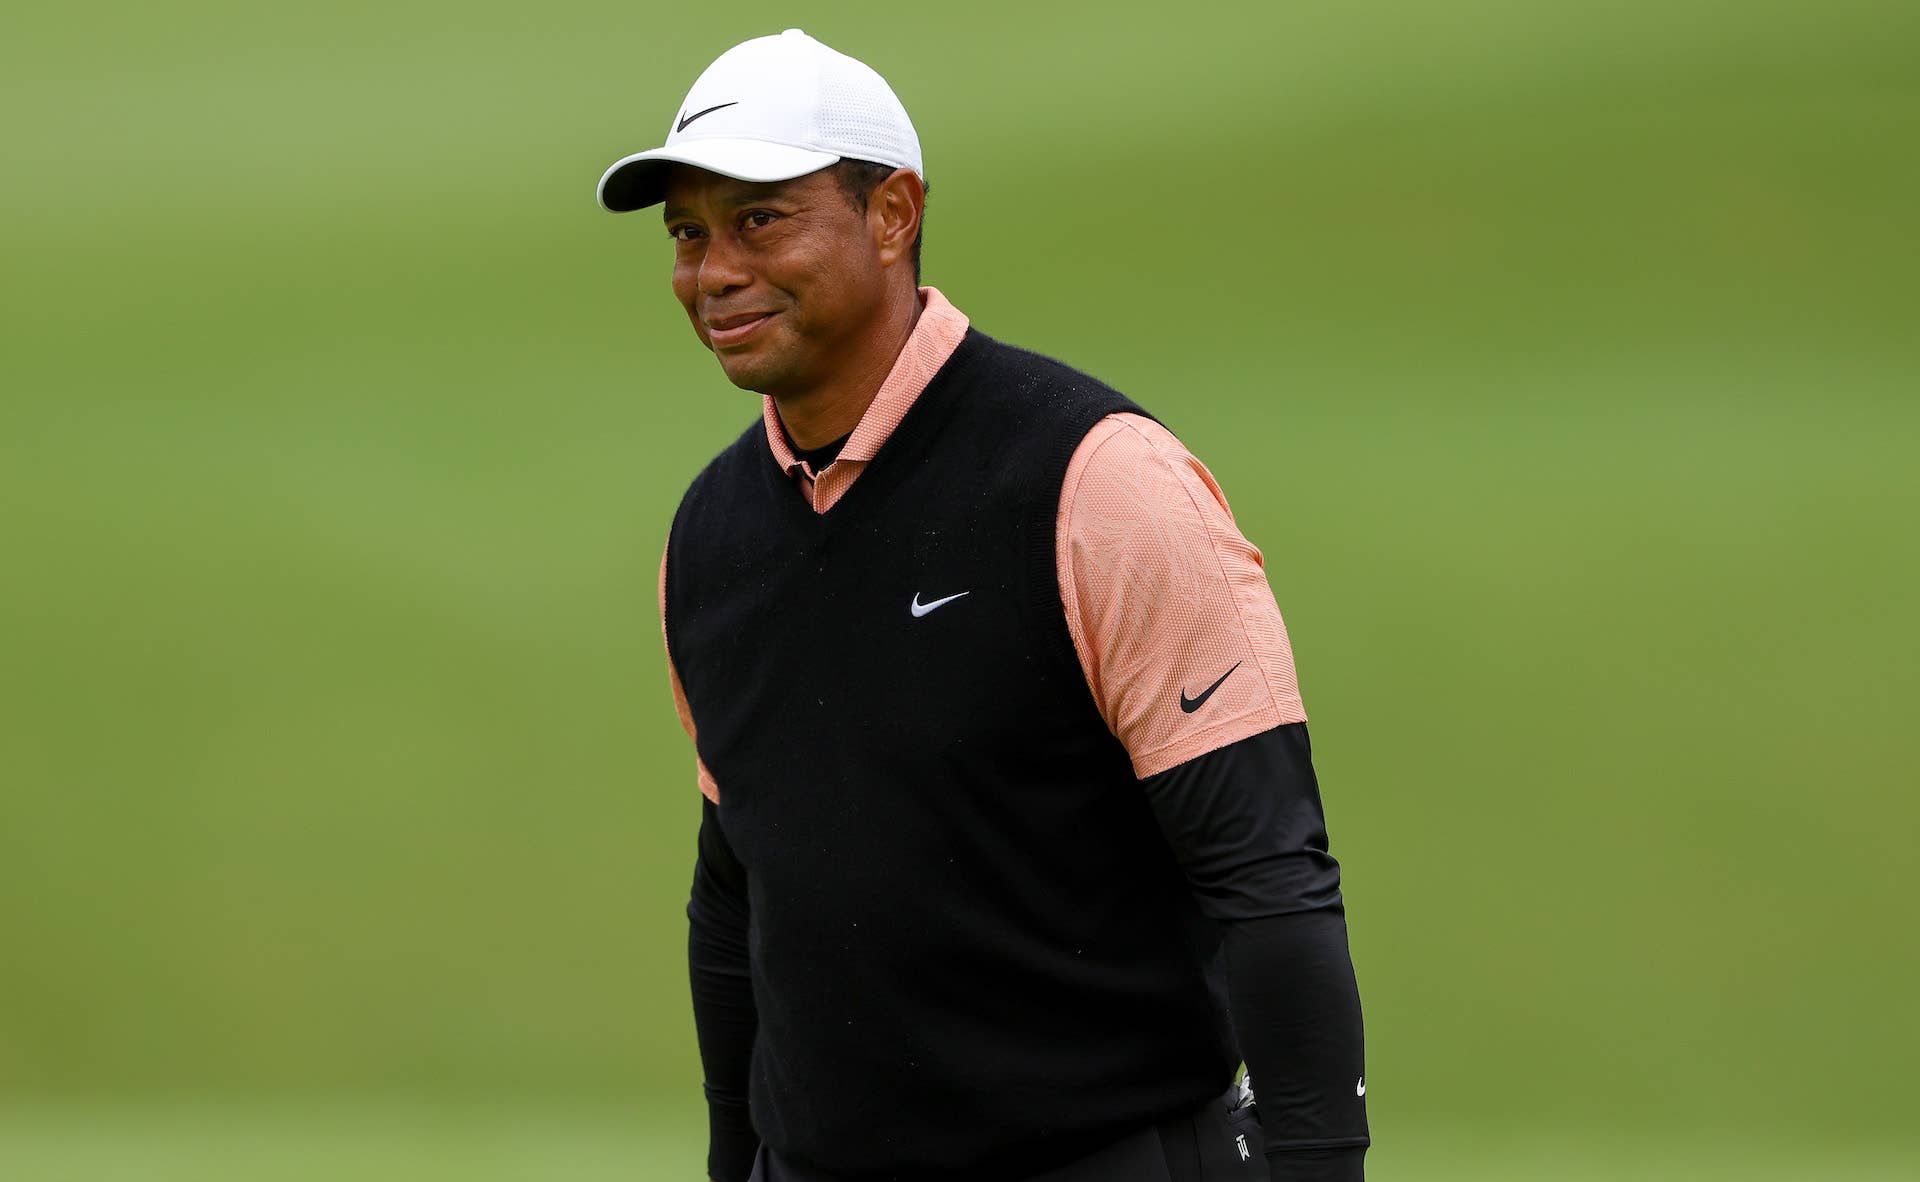 Tiger Woods during the 2022 Masters